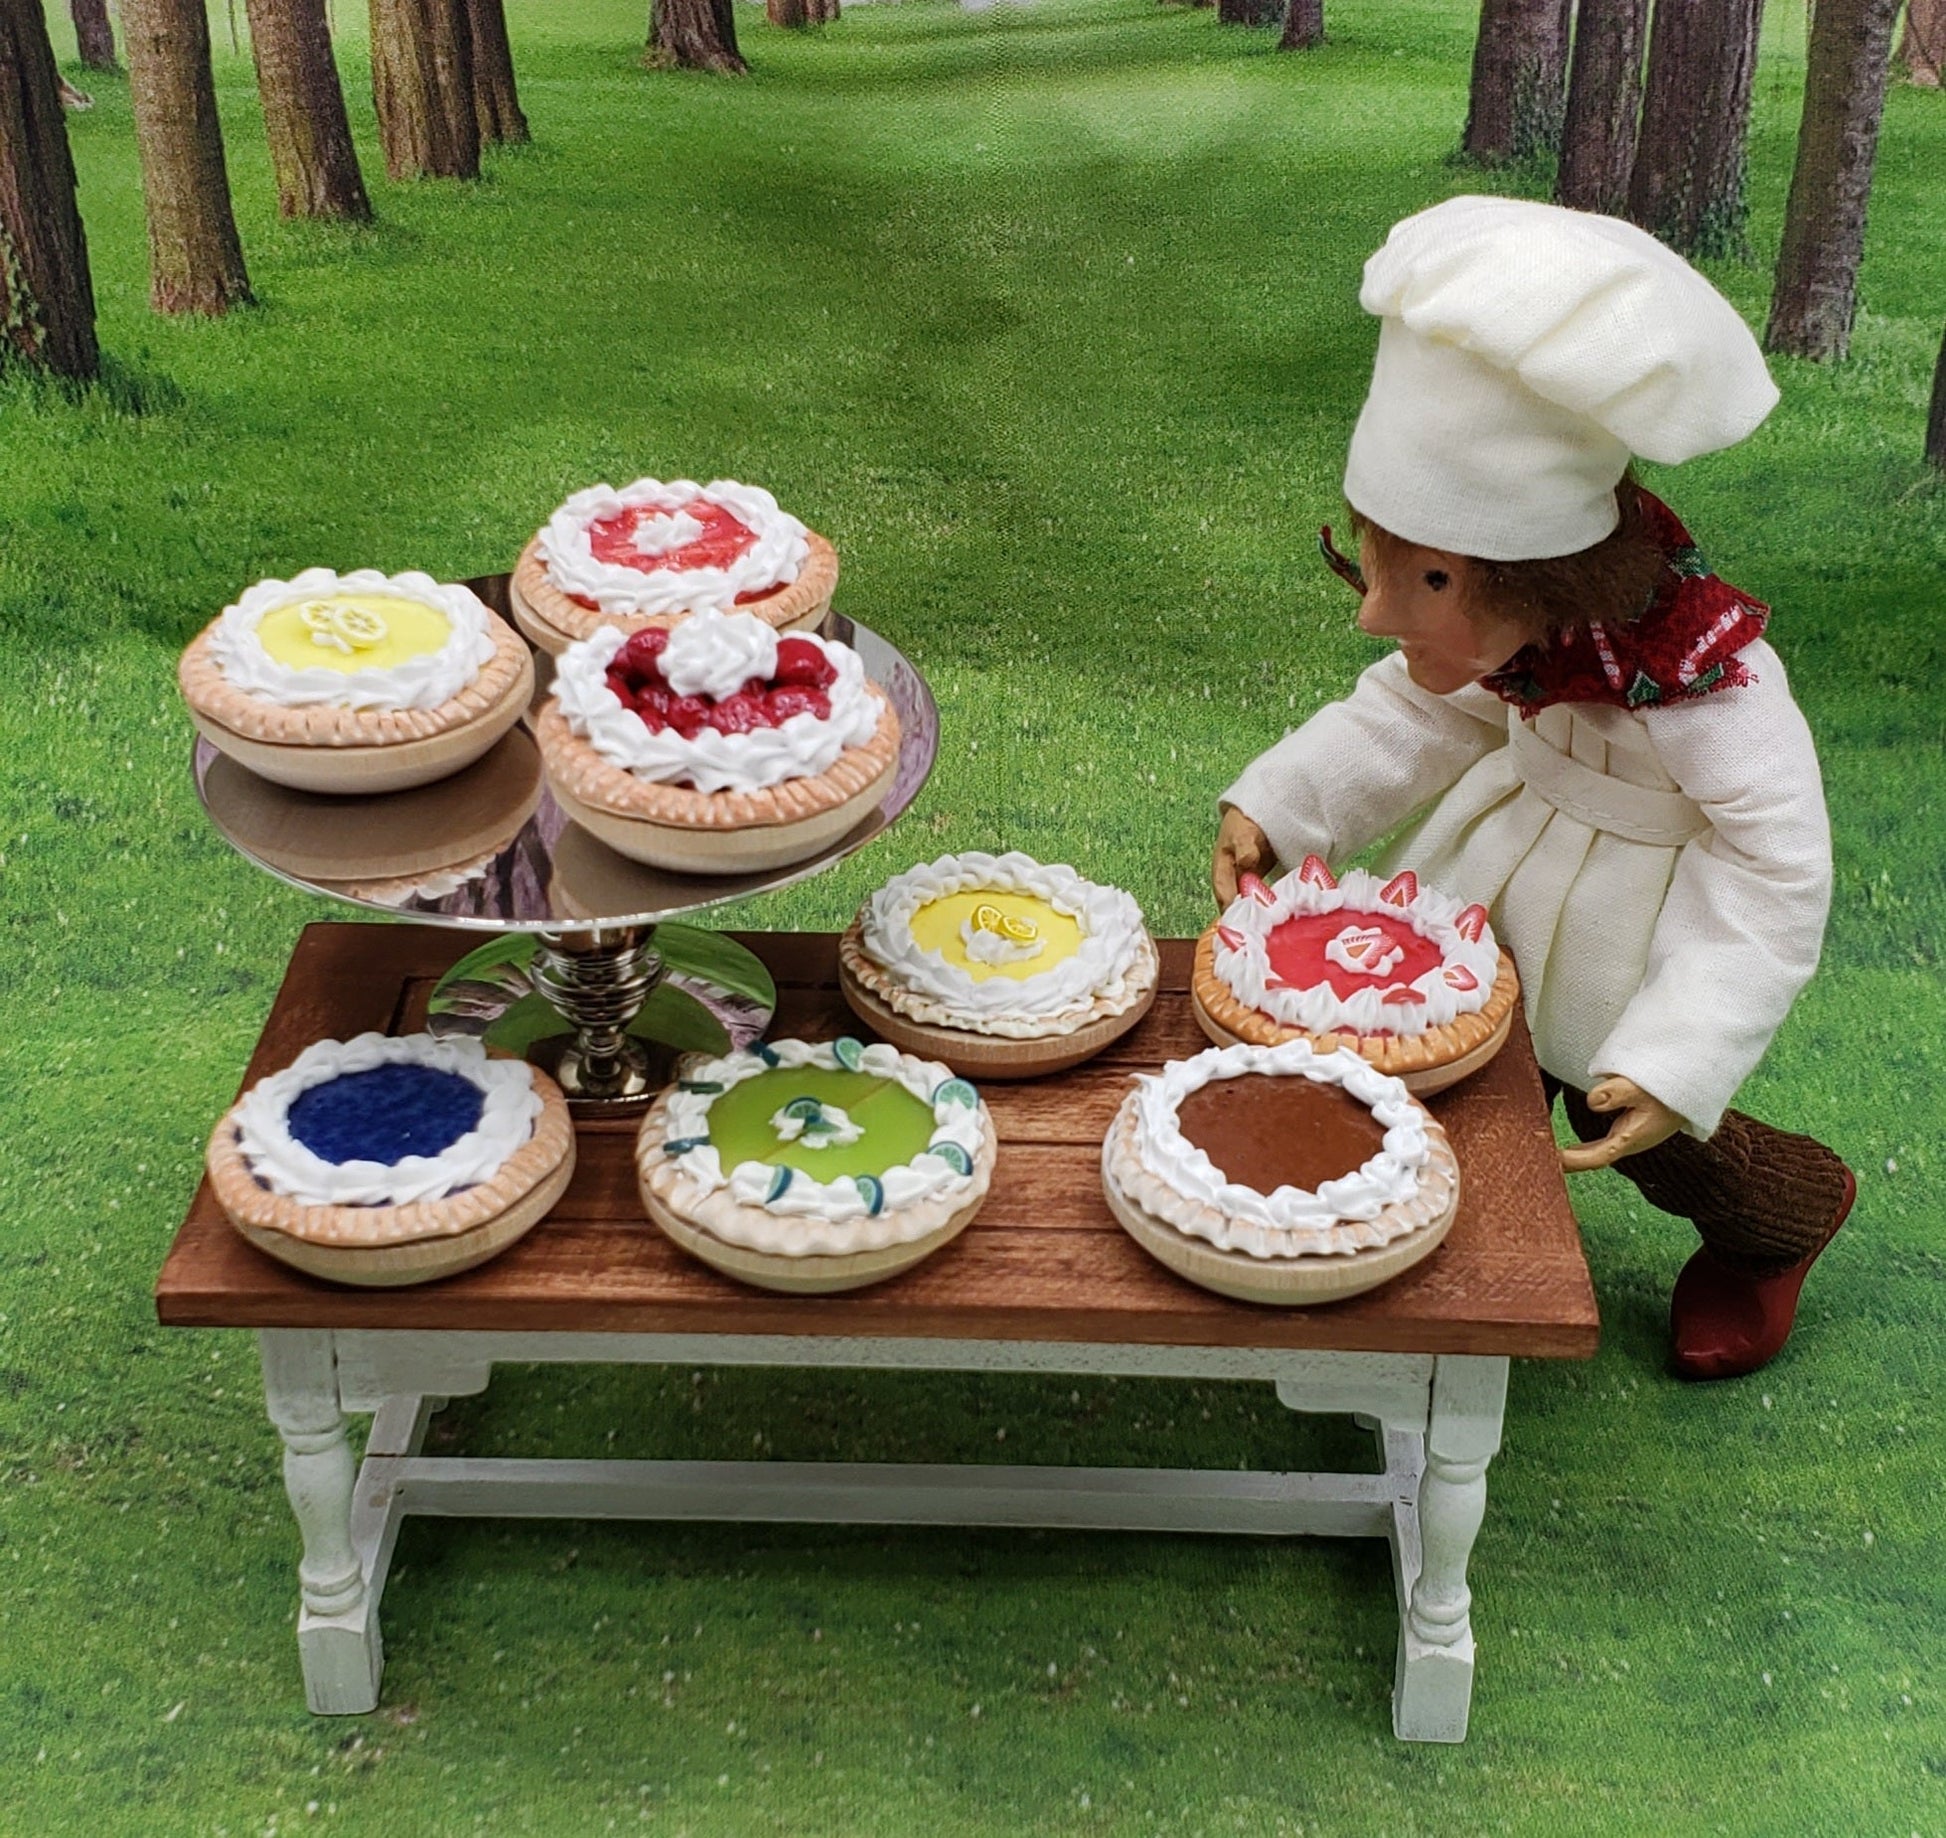 Kindle chef doll with pies